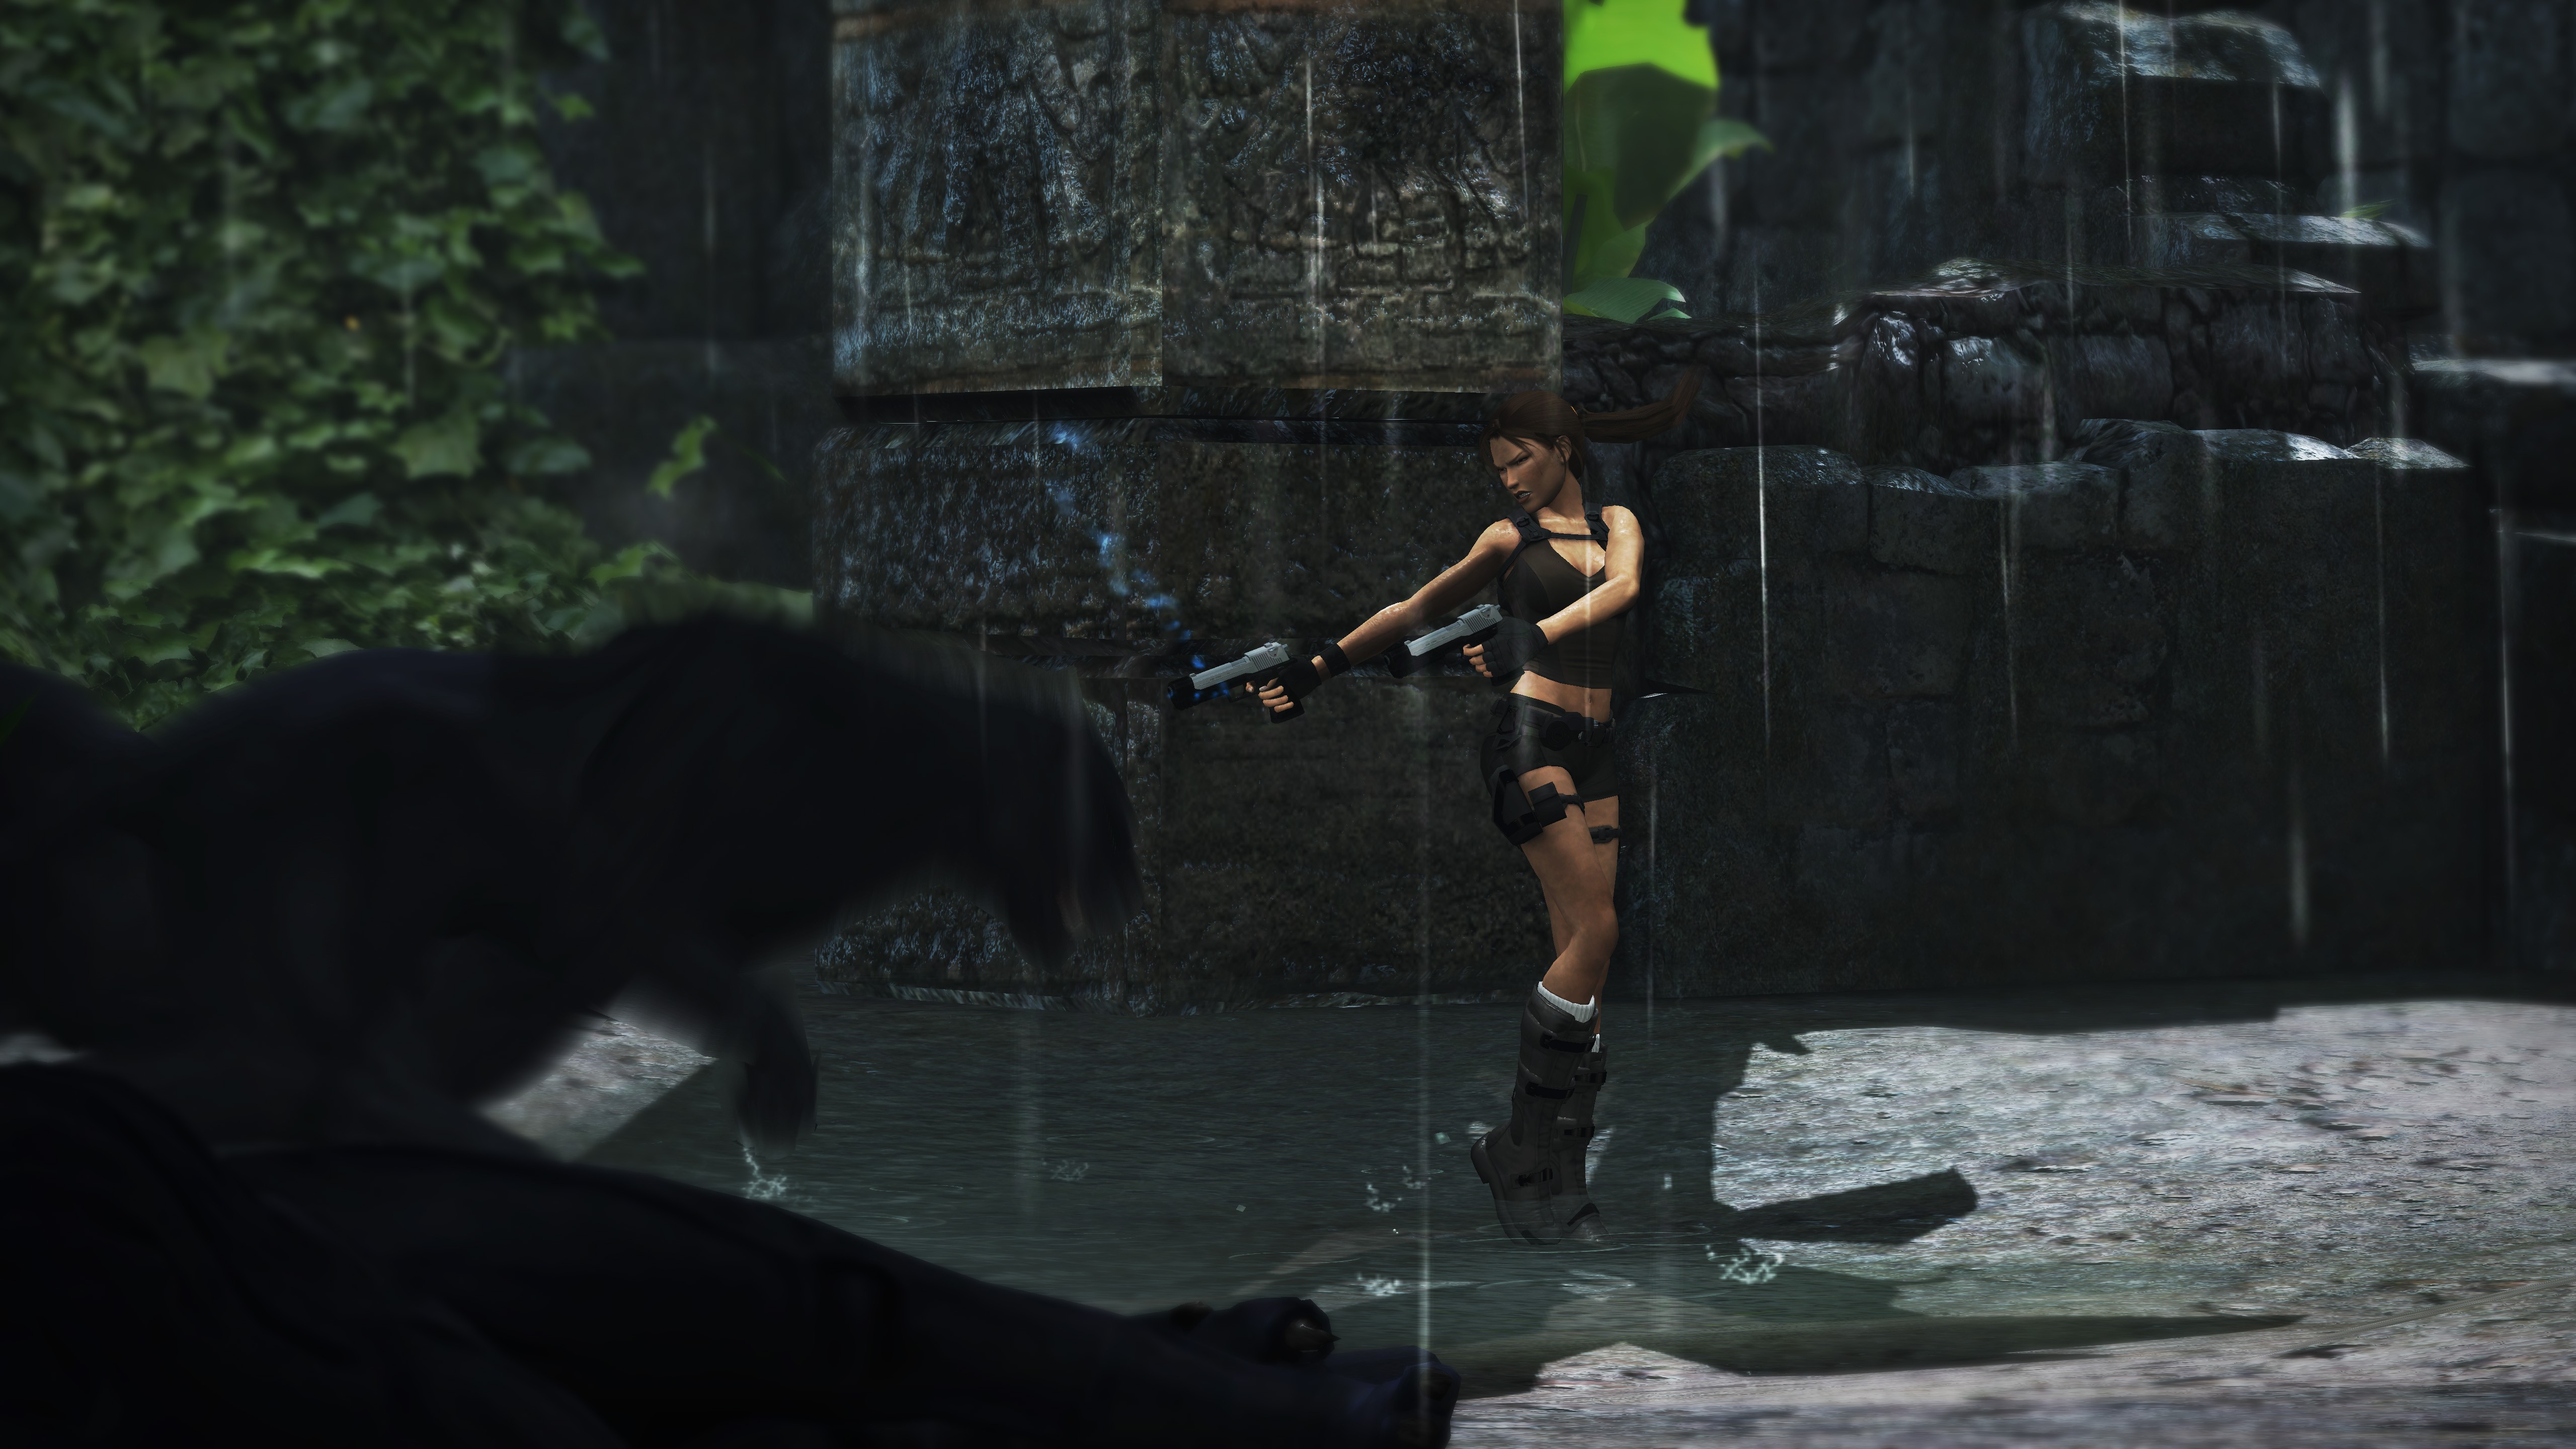 Media asset in full size related to 3dfxzone.it news item entitled as follows: Tomb Raider Underworld, Eidos pubblica 11 nuovi screenshots | Image Name: news6742_5.jpg